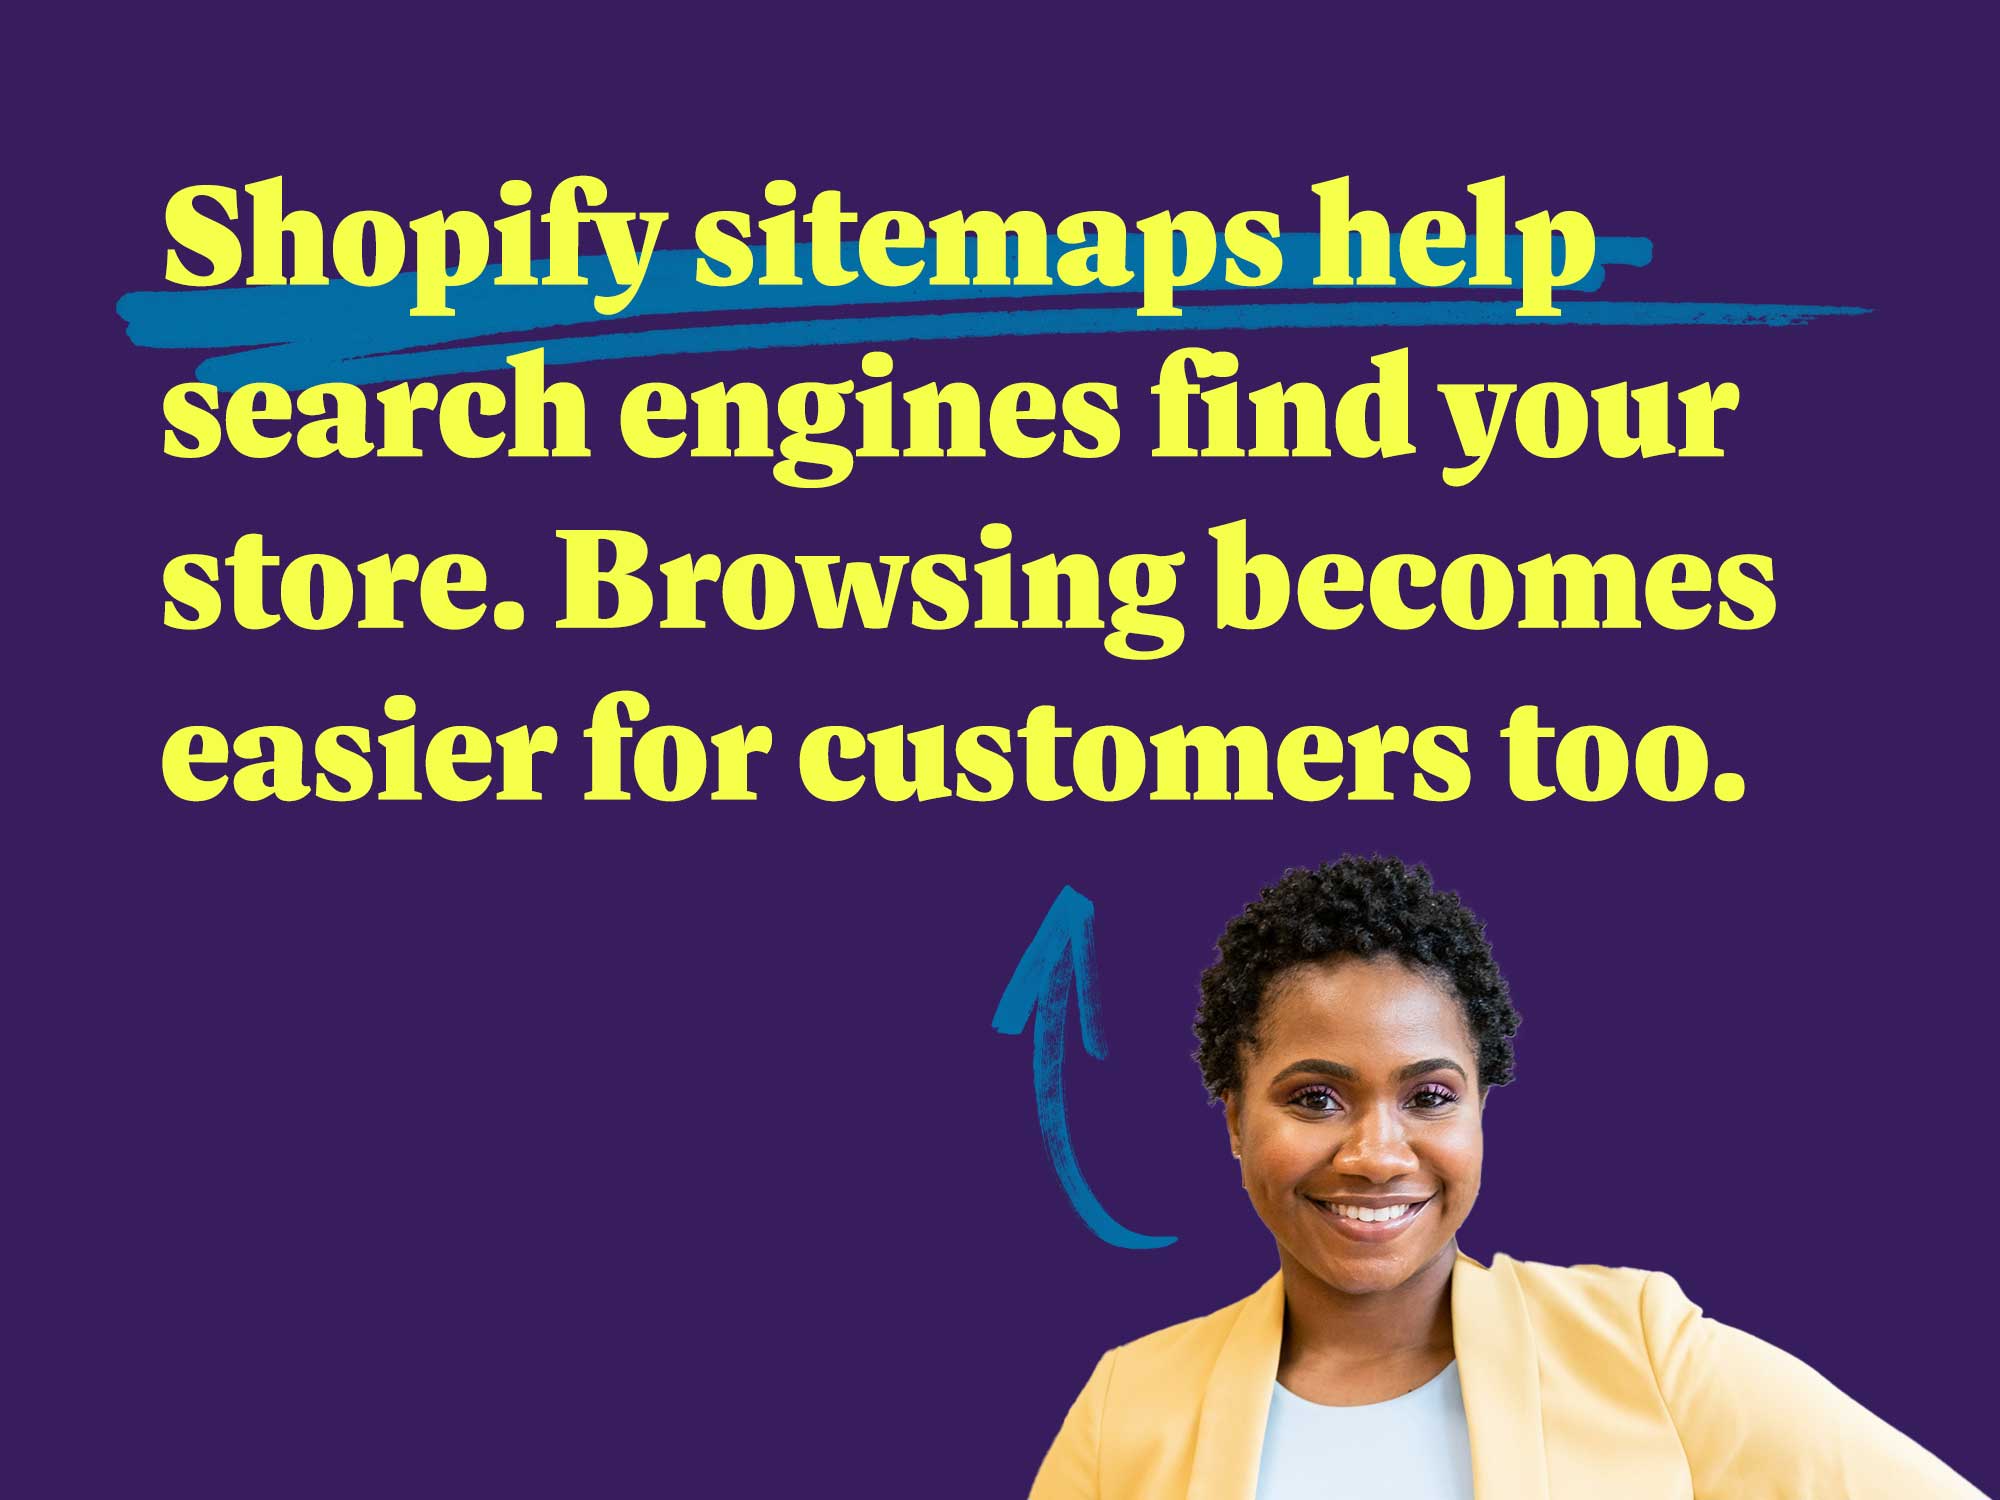 Shopify sitemaps help search engines find your store. Browsing becomes easier for customers too.